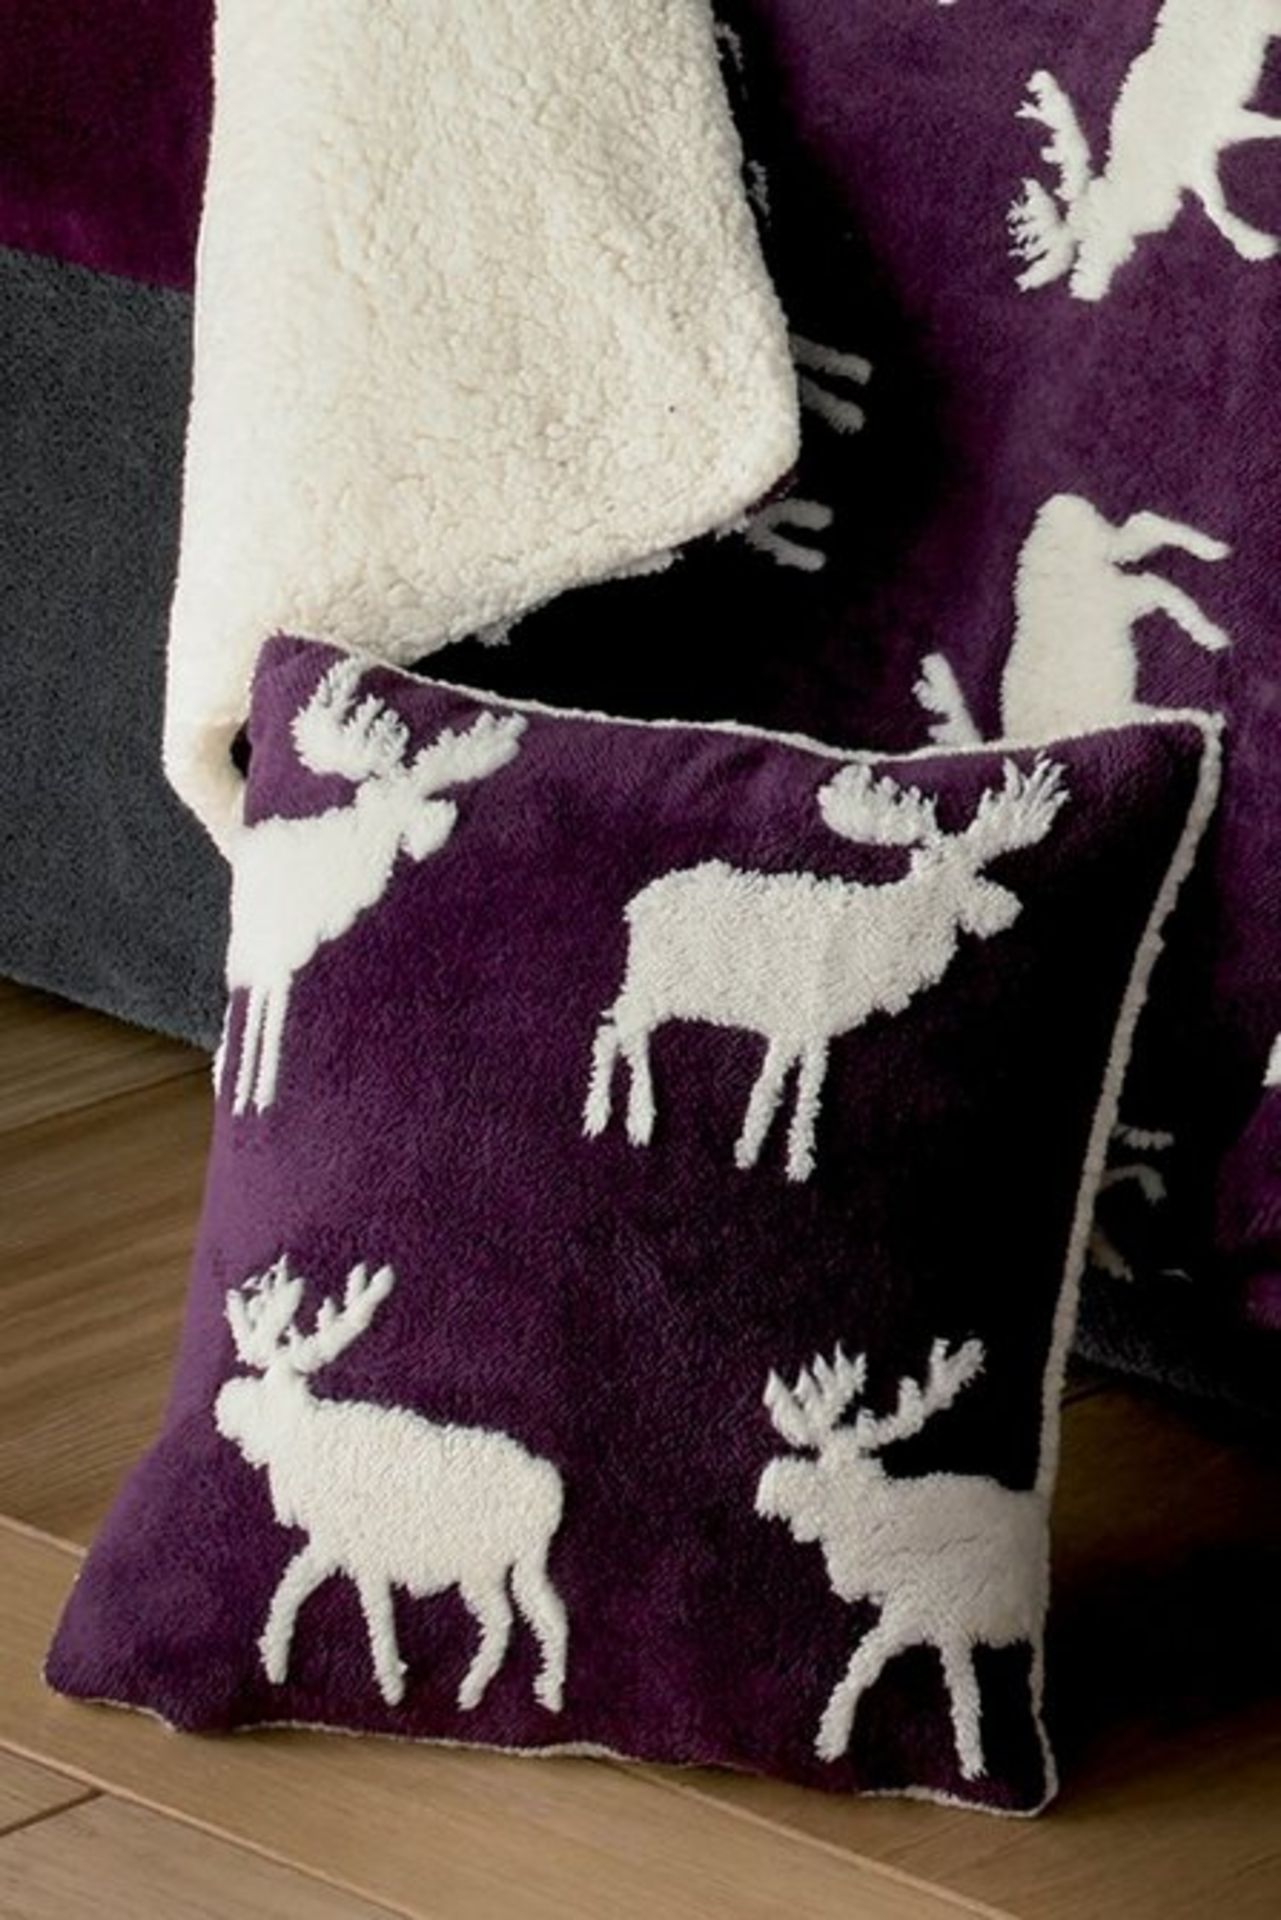 1 BAGGED WARM AND COSY TEDDY 3D STAG CUSHION COVER IN PLUM (PUBLIC VIEWING AVAILABLE)